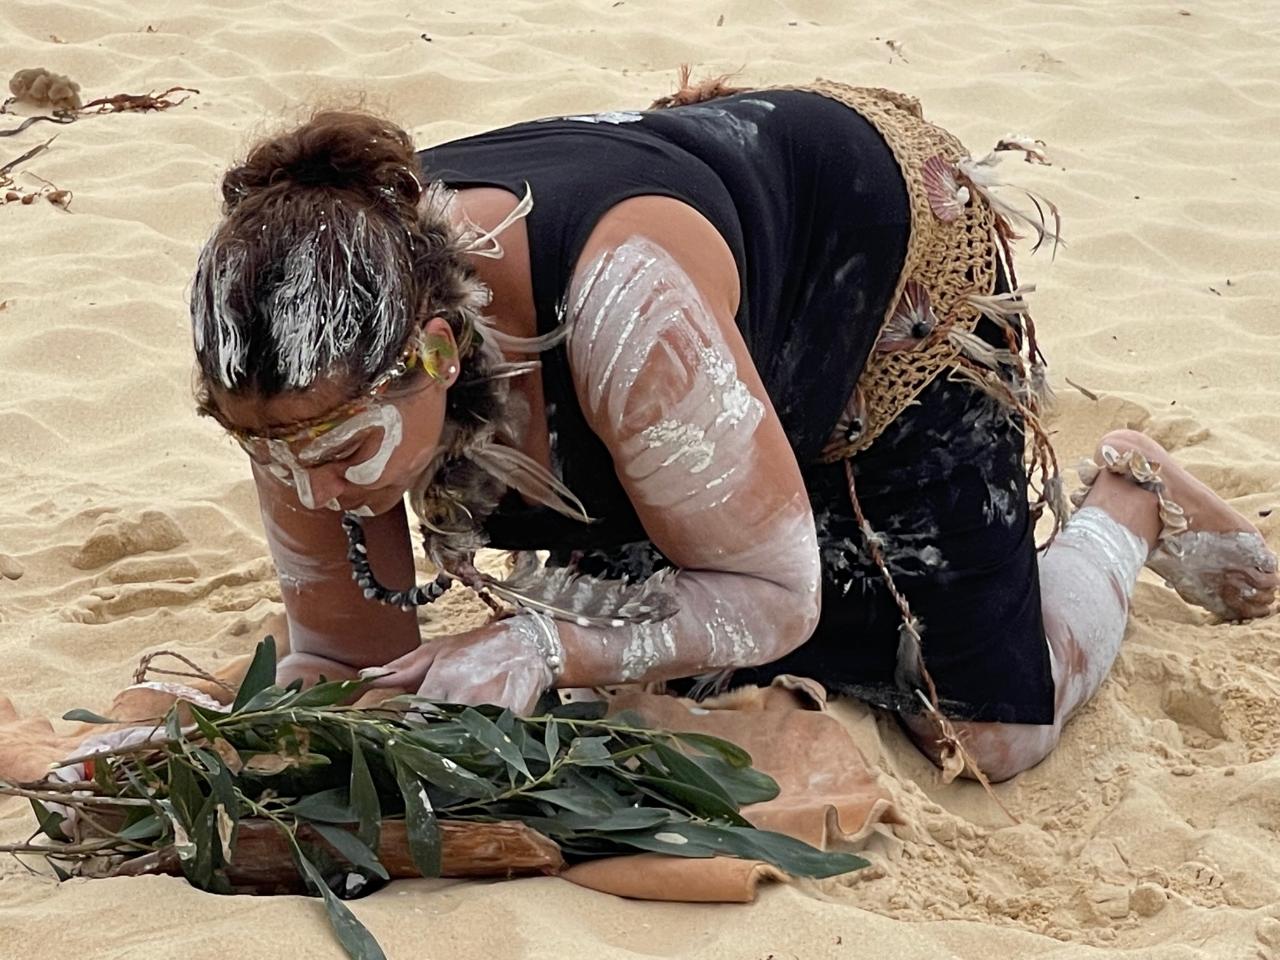 WELCOME TO COUNTRY - PARTIALLY GUIDED E-BIKE CULTURAL TOUR WITH YUIN ABORIGINAL STORYTELLING - Find out more about the spiritual connection to country